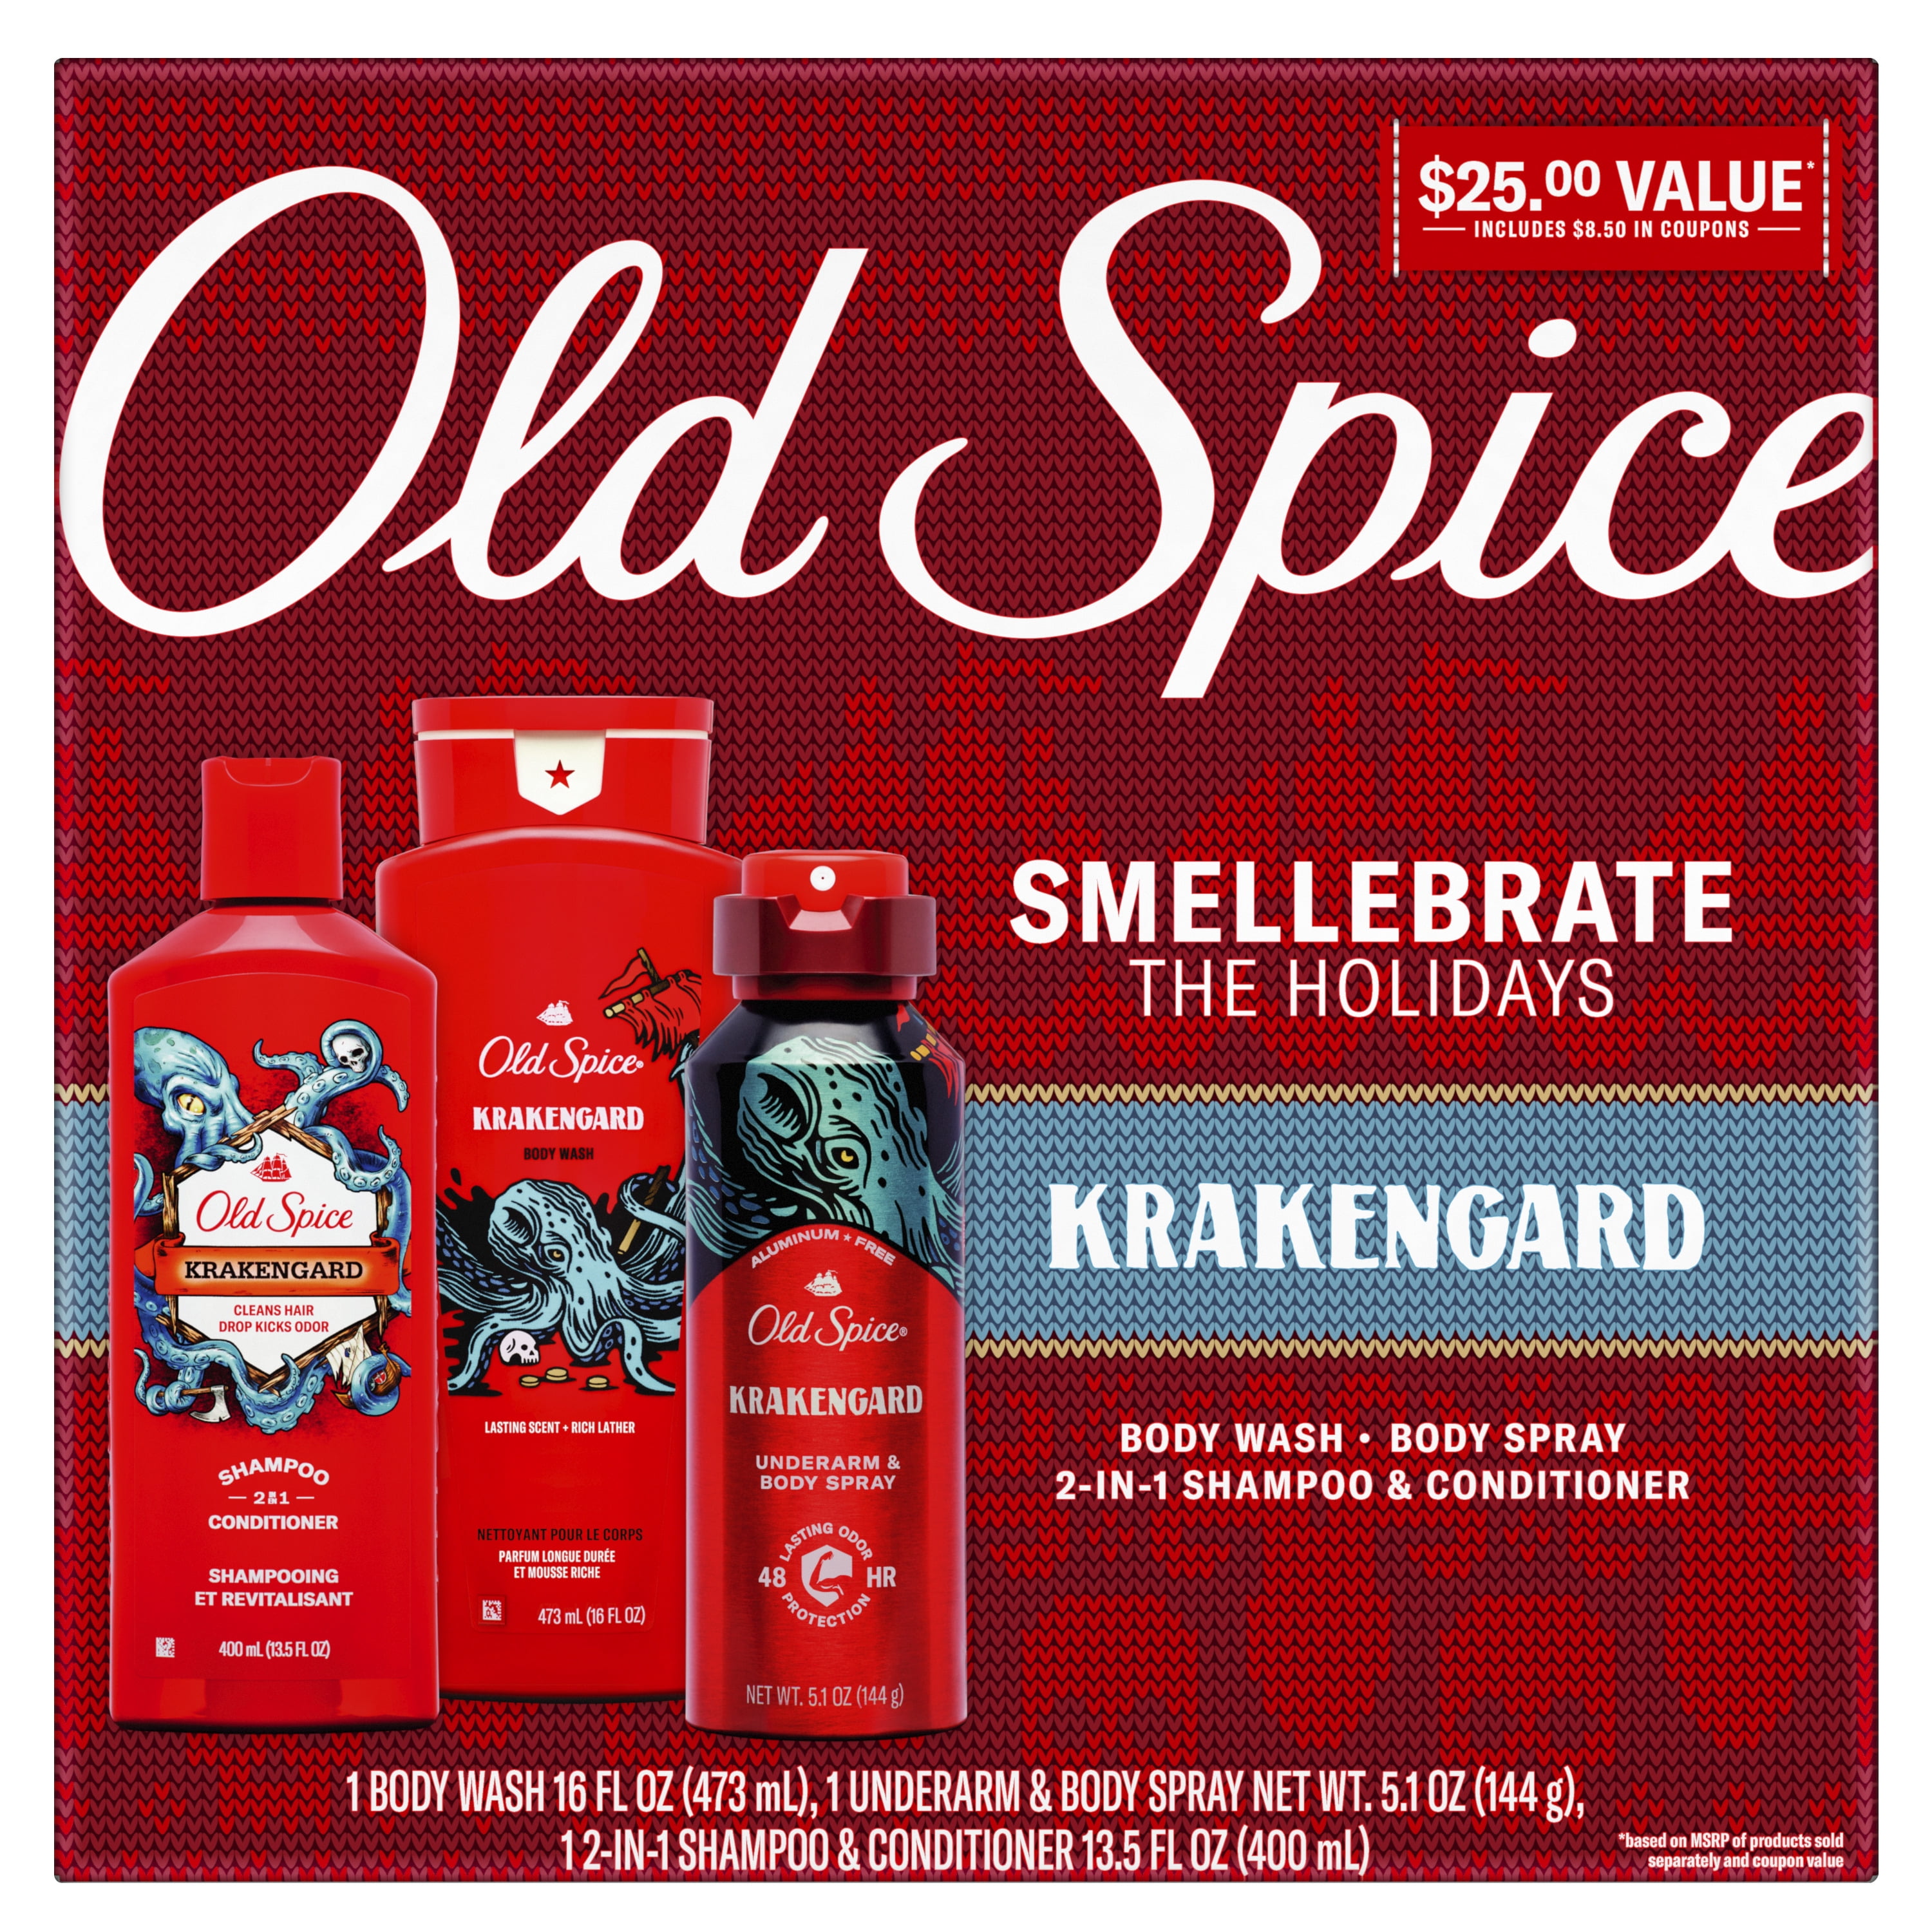 ($25 Value) Old Spice Krakengard Holiday Pack includes Bodywash, Bodyspray, and 2-in-1 Shampoo & Conditioner